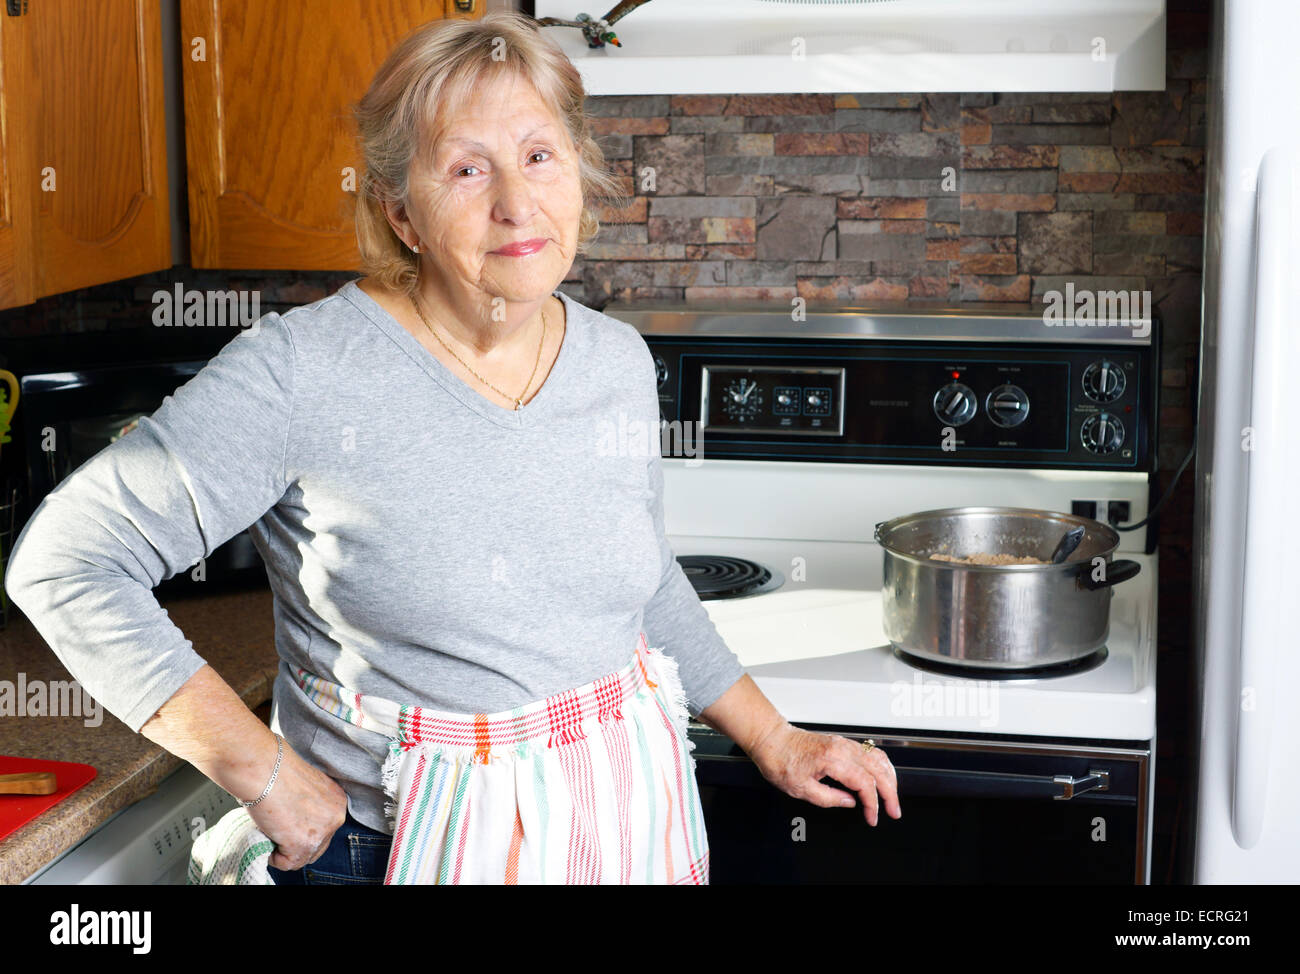 Friendly smiling grandmother or senior woman cooking in her kitchen Stock Photo